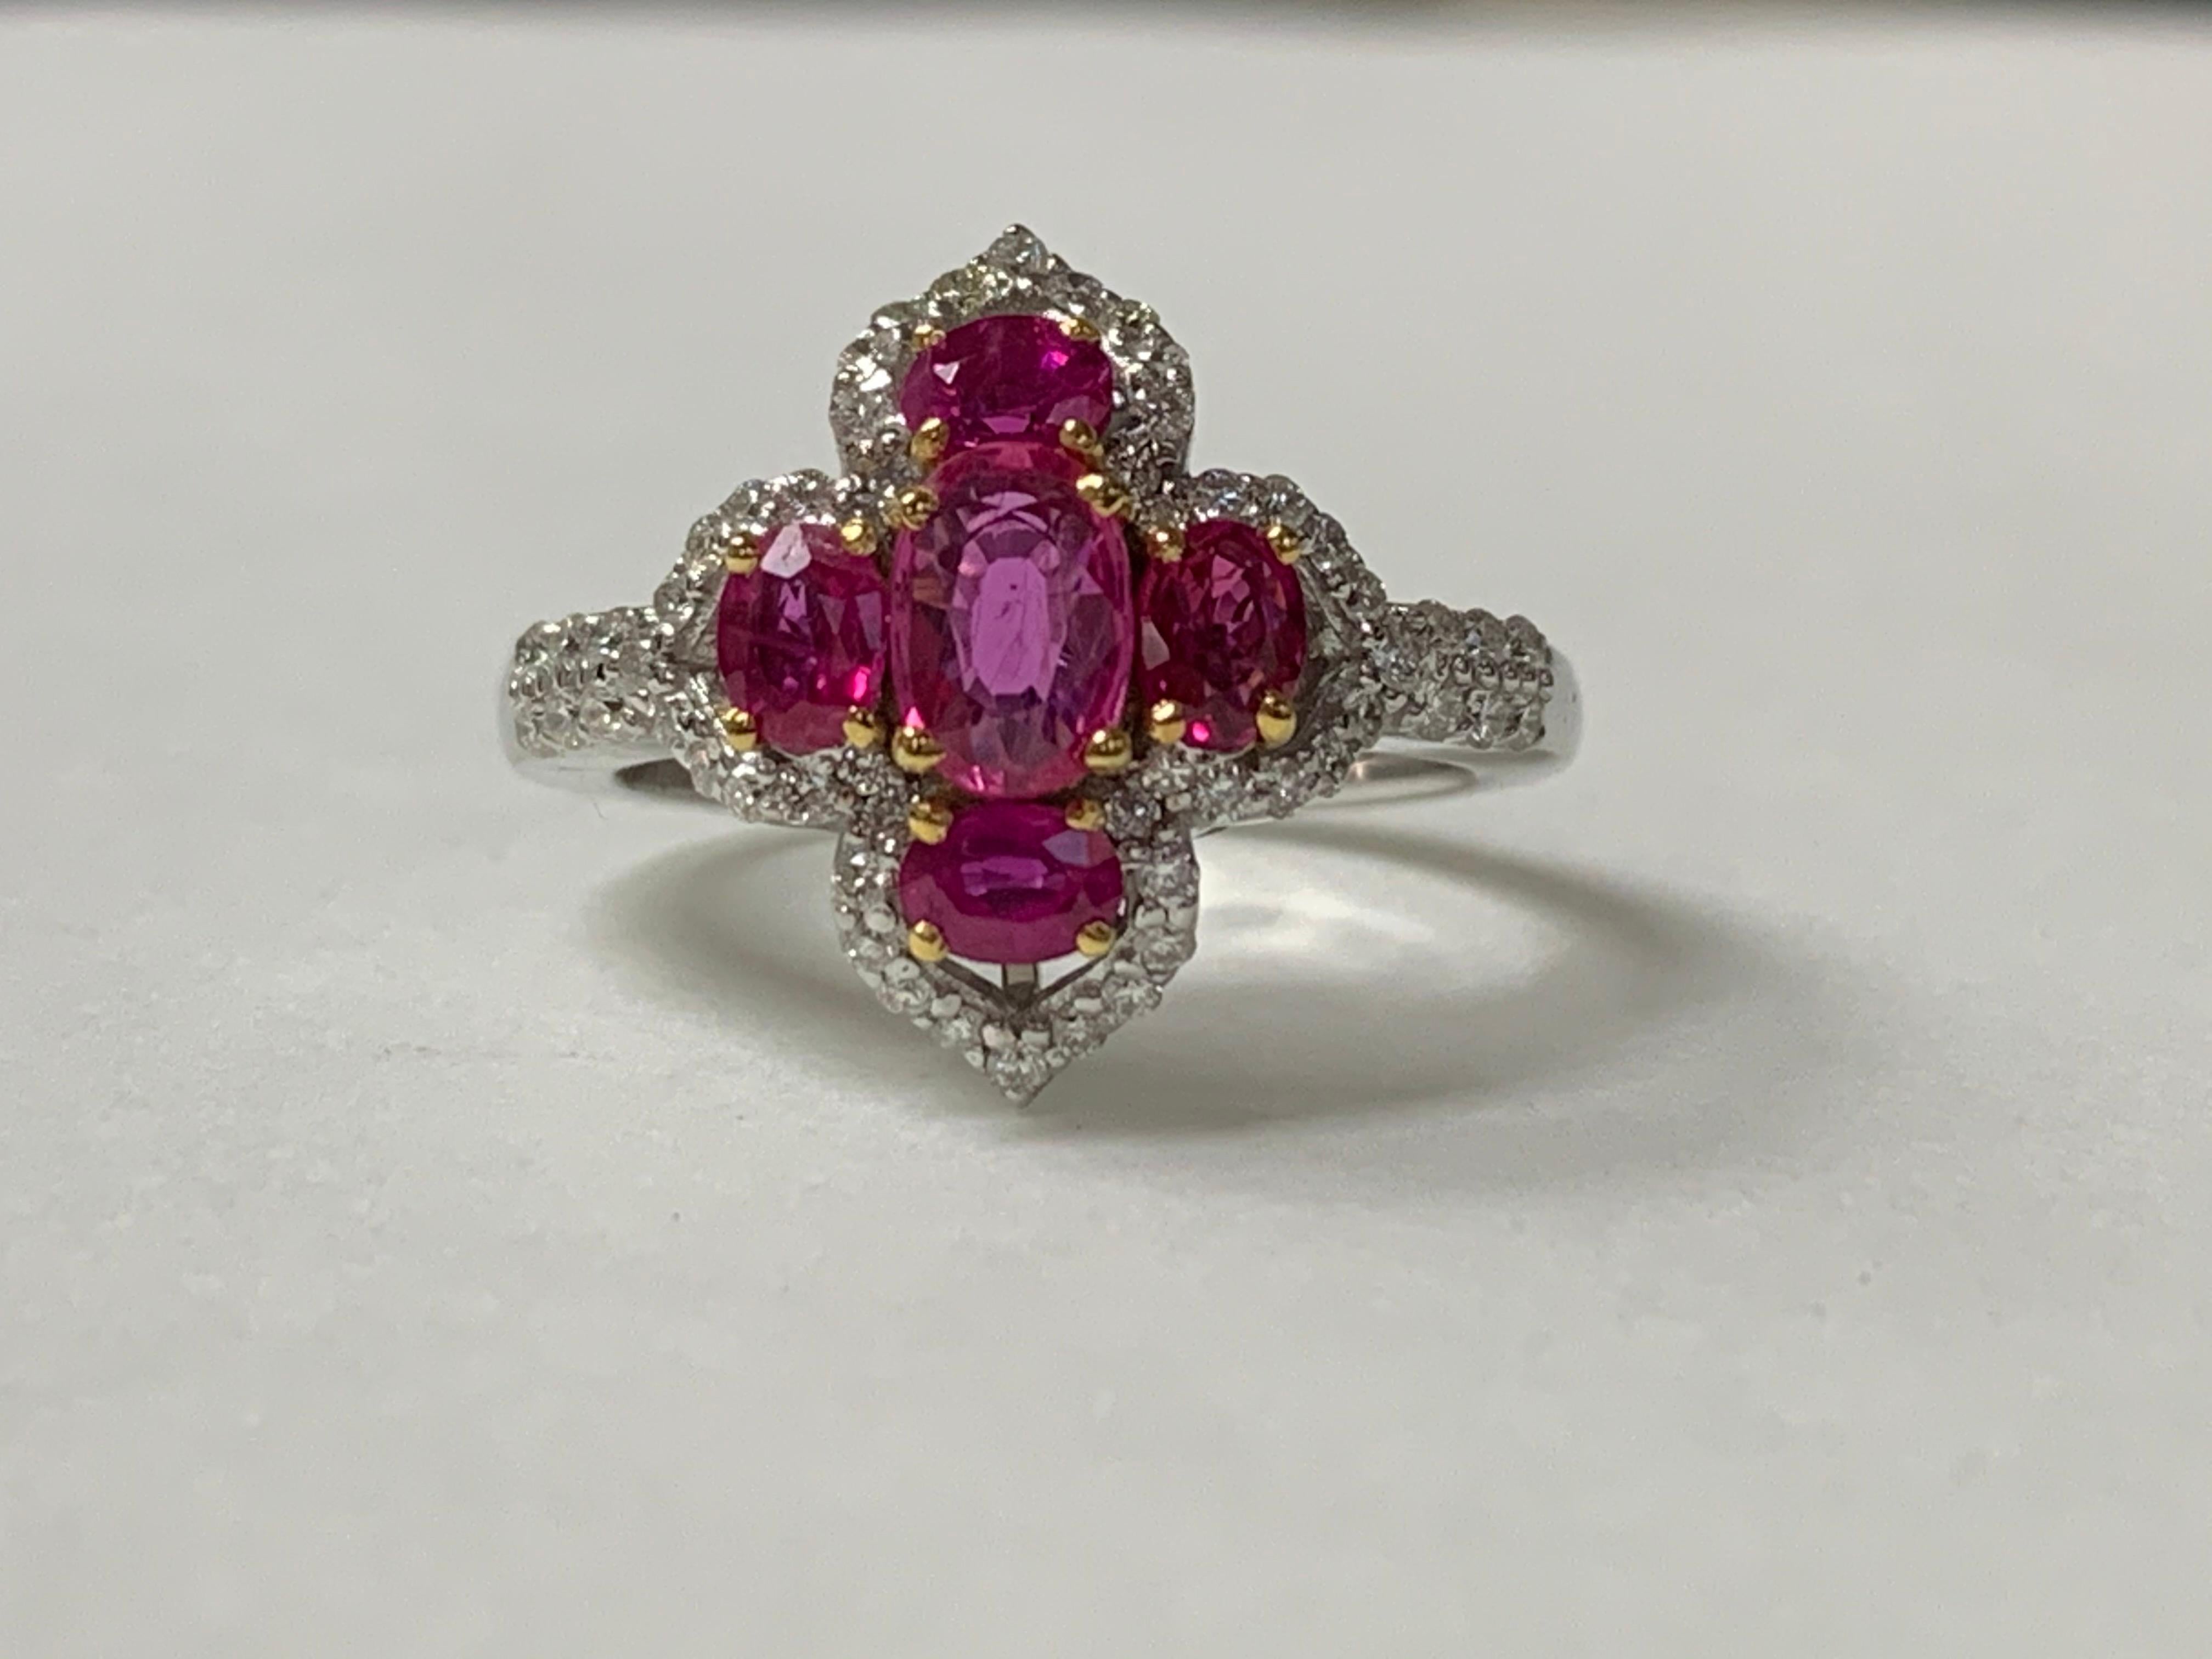 Oval Cut Diamond and Ruby Ring in 18 Karat White Gold